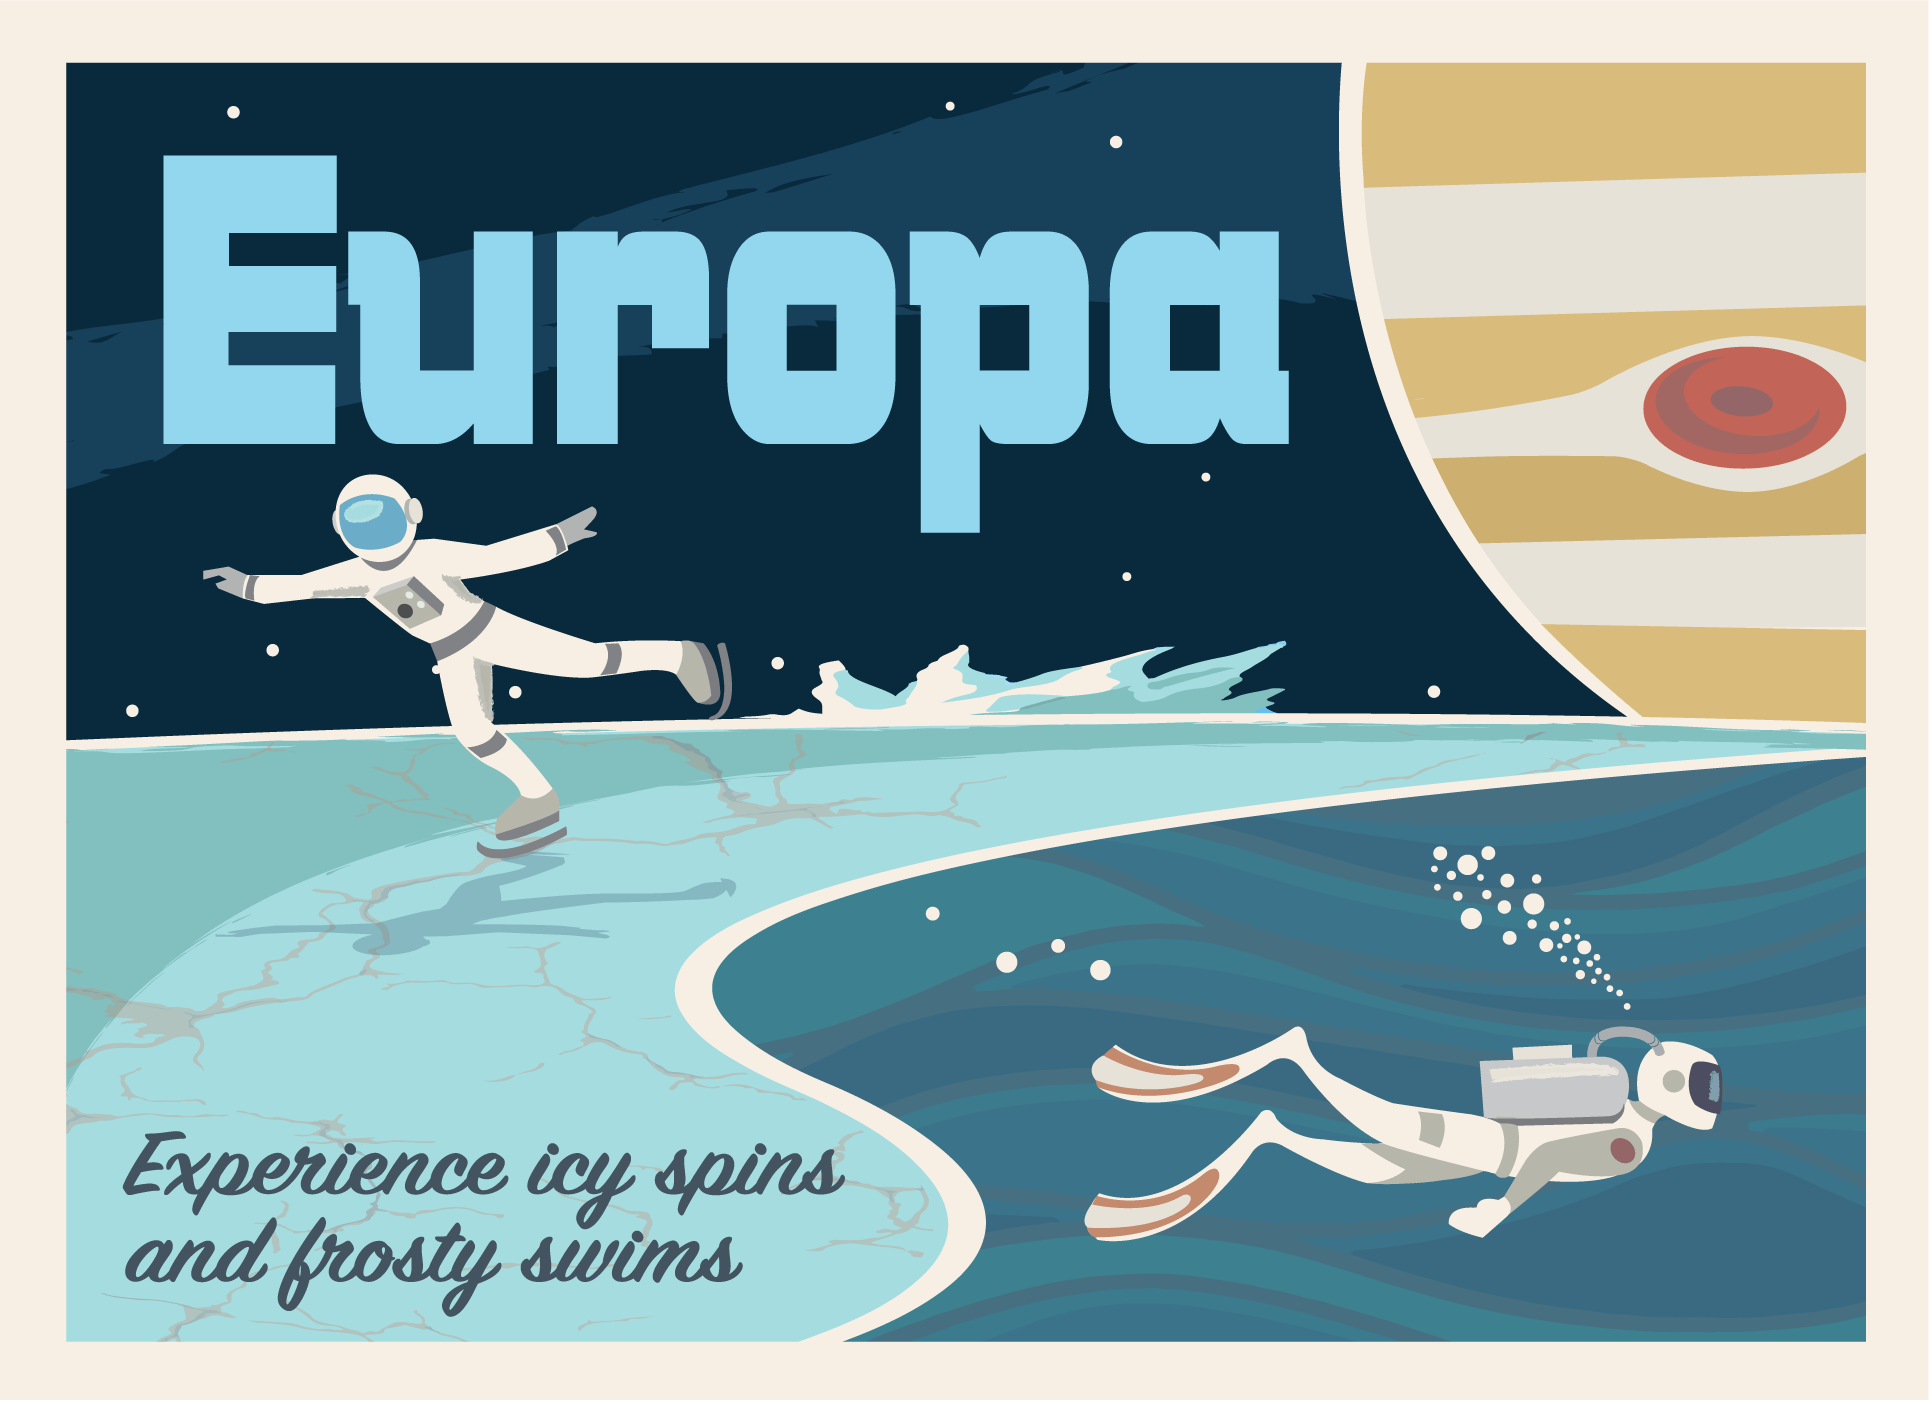 Postcard advertising travel to Jupiter's moon Europa. The text on the postcard reads Europa - Experience icy spins and frosty swims! Behind the text is an illustration of an astronaut ice skating on the icy surface of Europa while another astronaut swims beneath the icy surface.